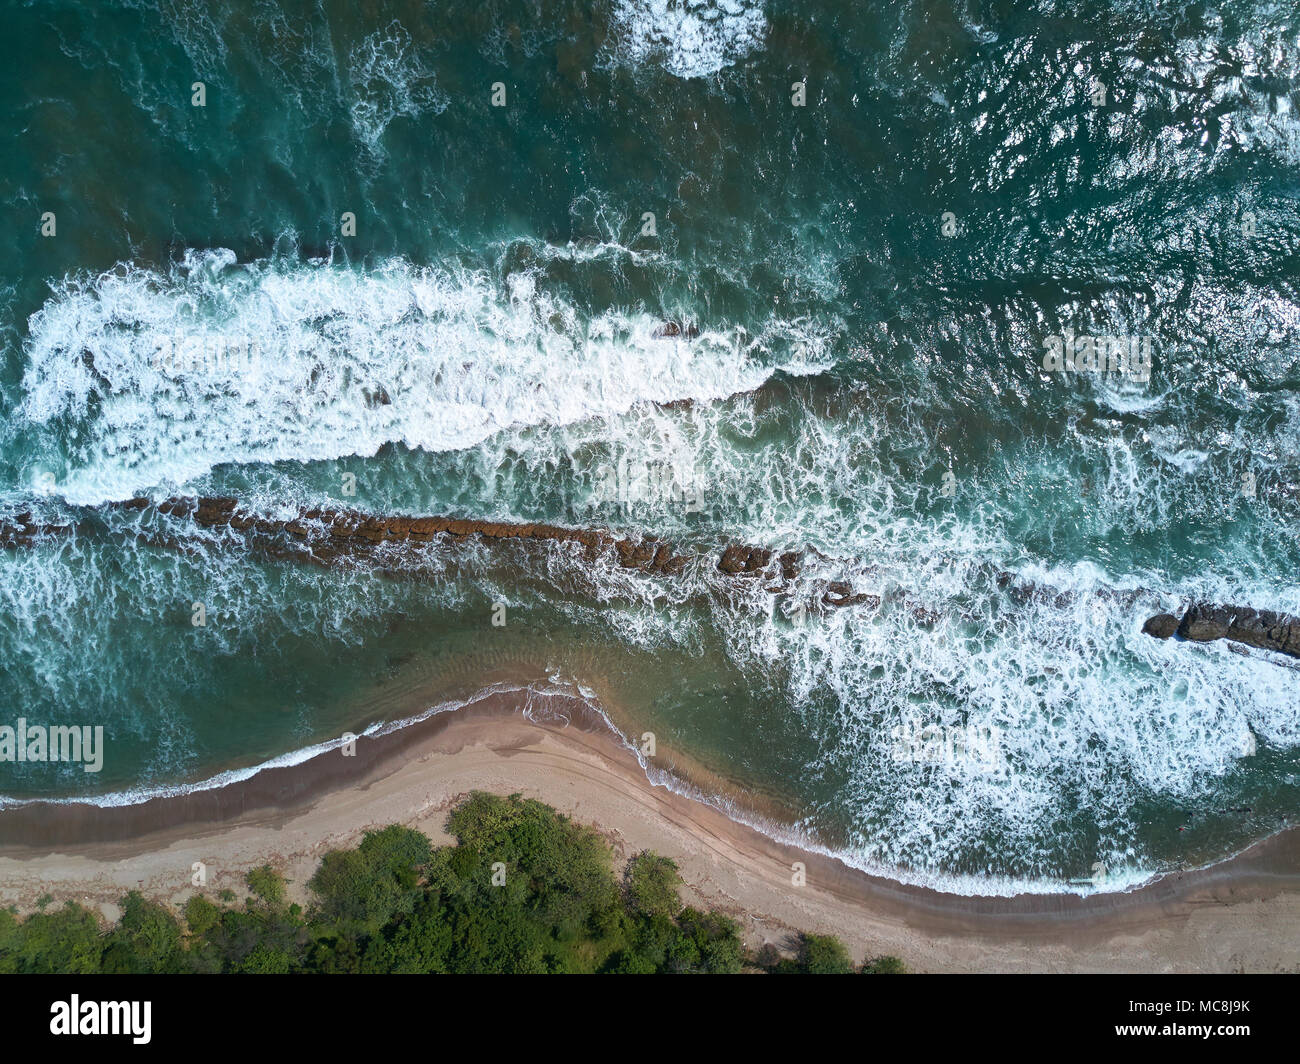 Big ocean waves hits shore aerial above view Stock Photo